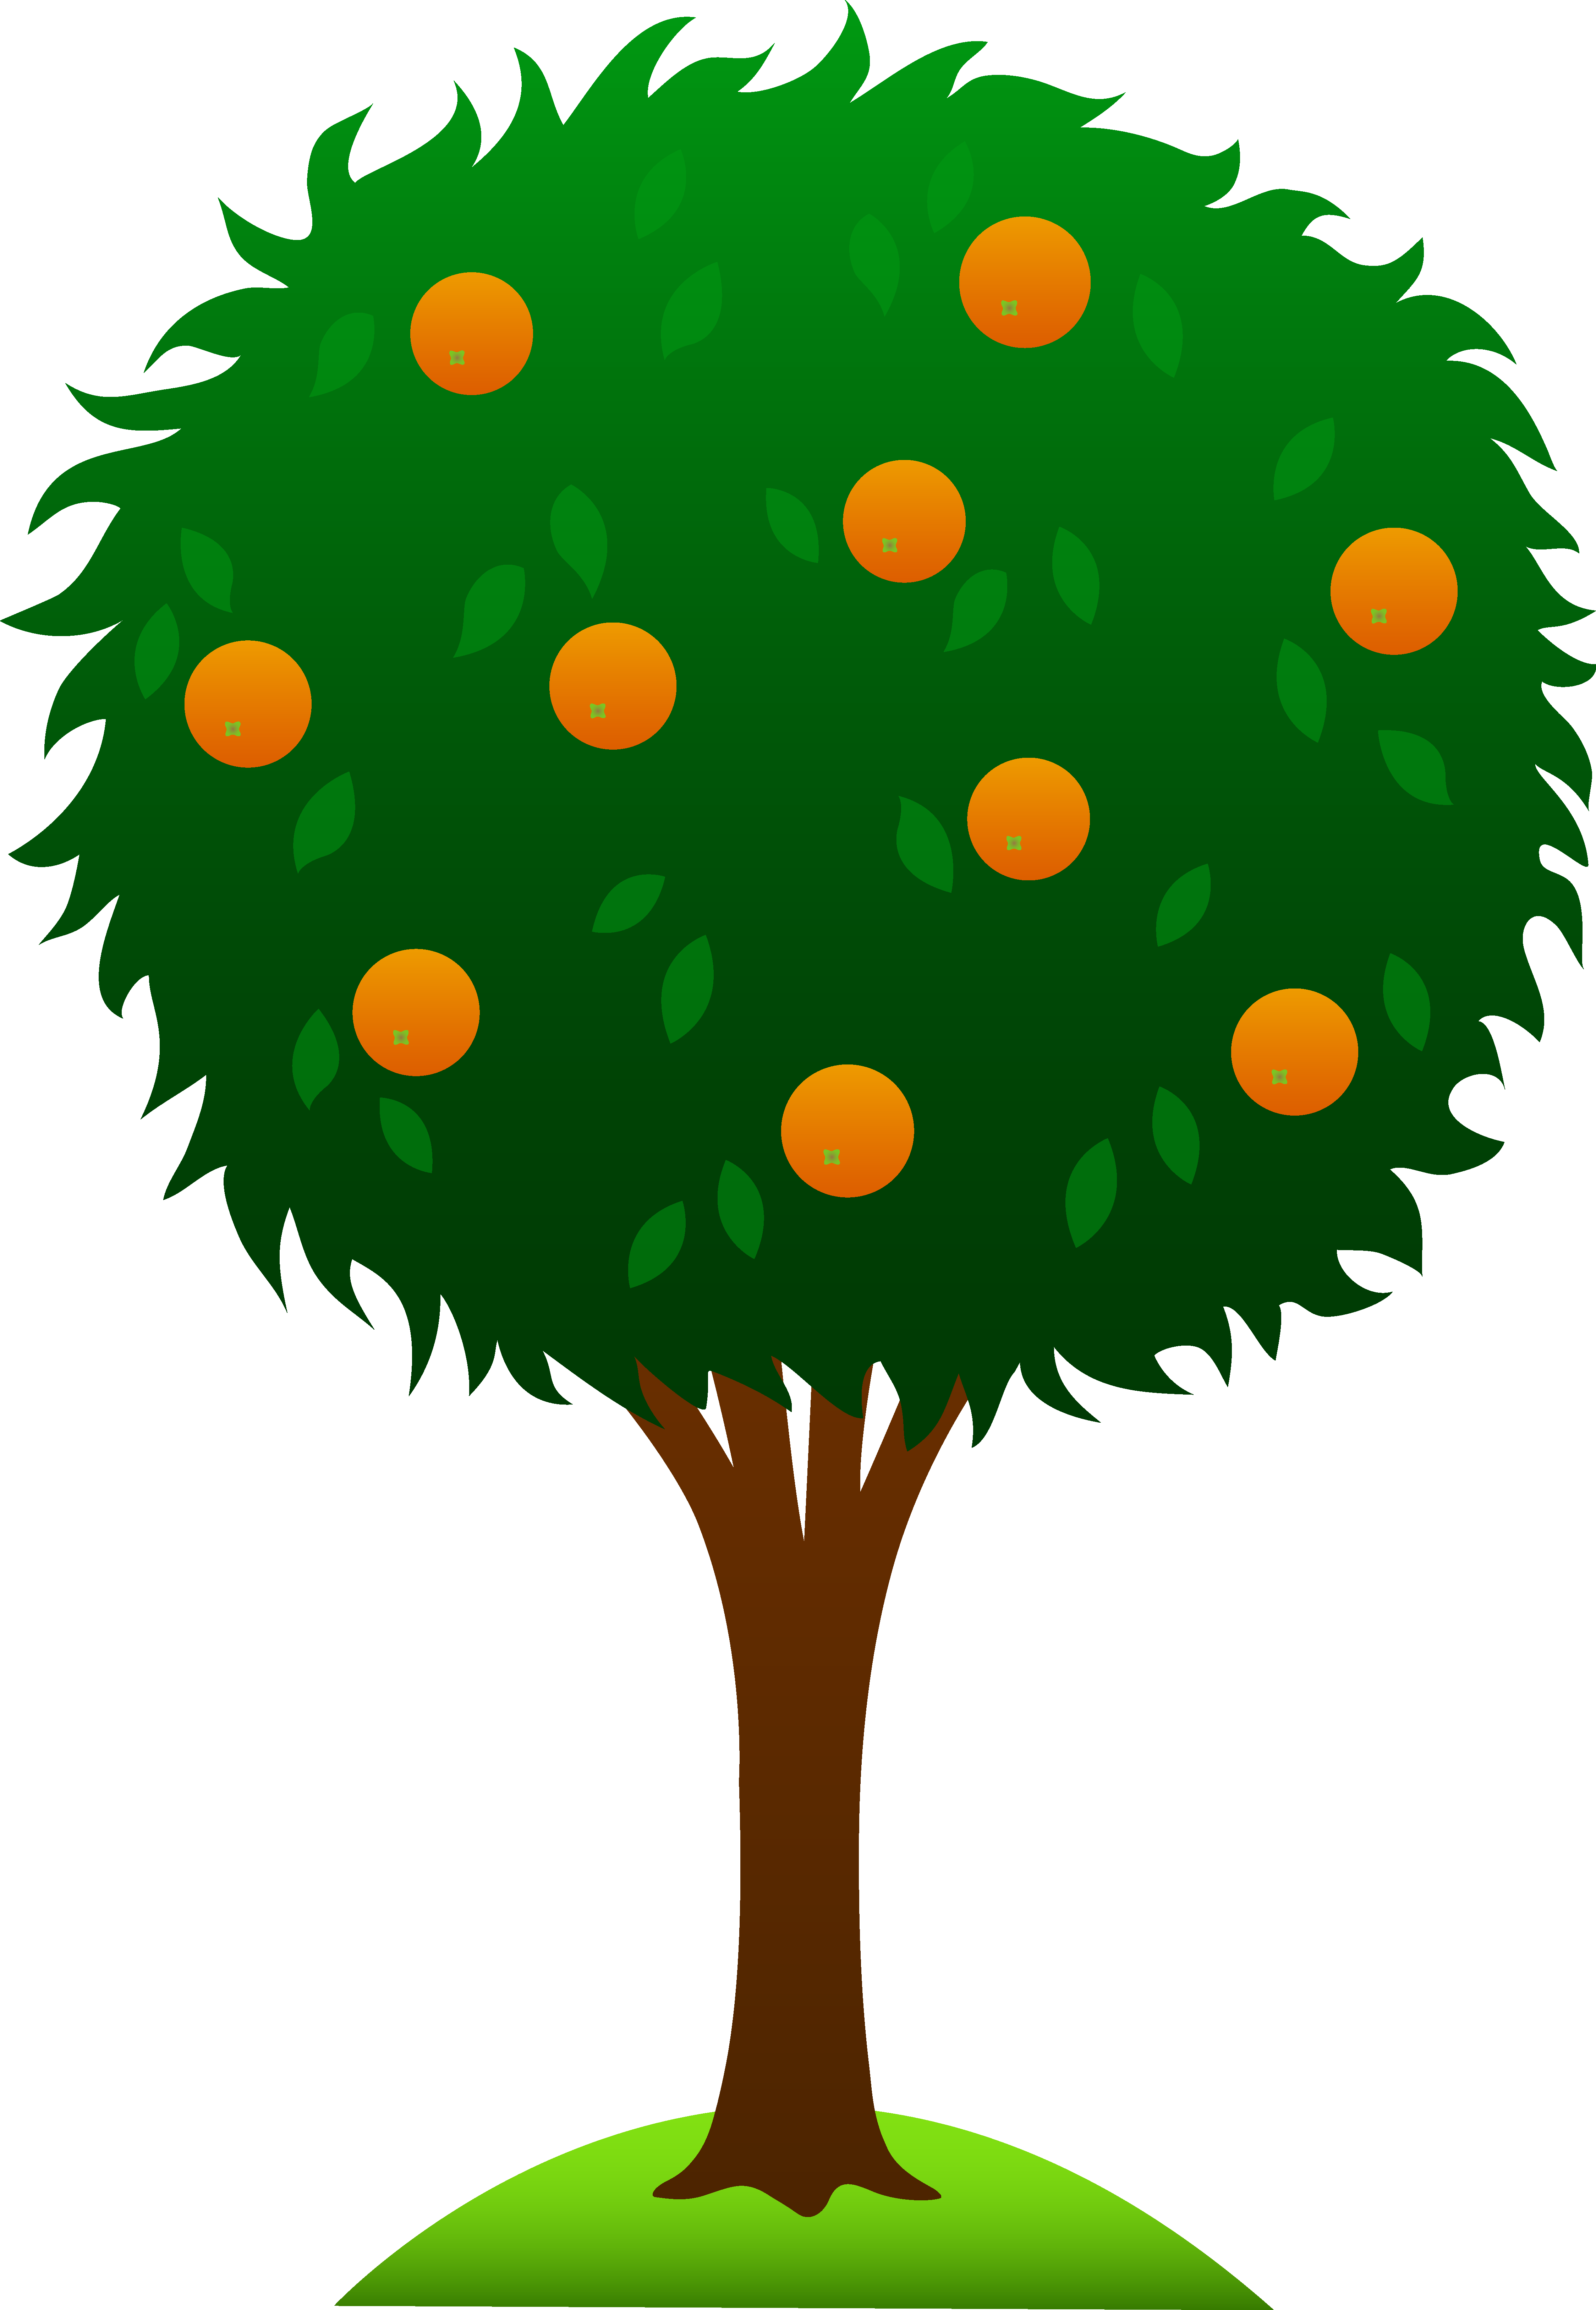 Free Tree Images Free, Download Free Clip Art, Free Clip Art.